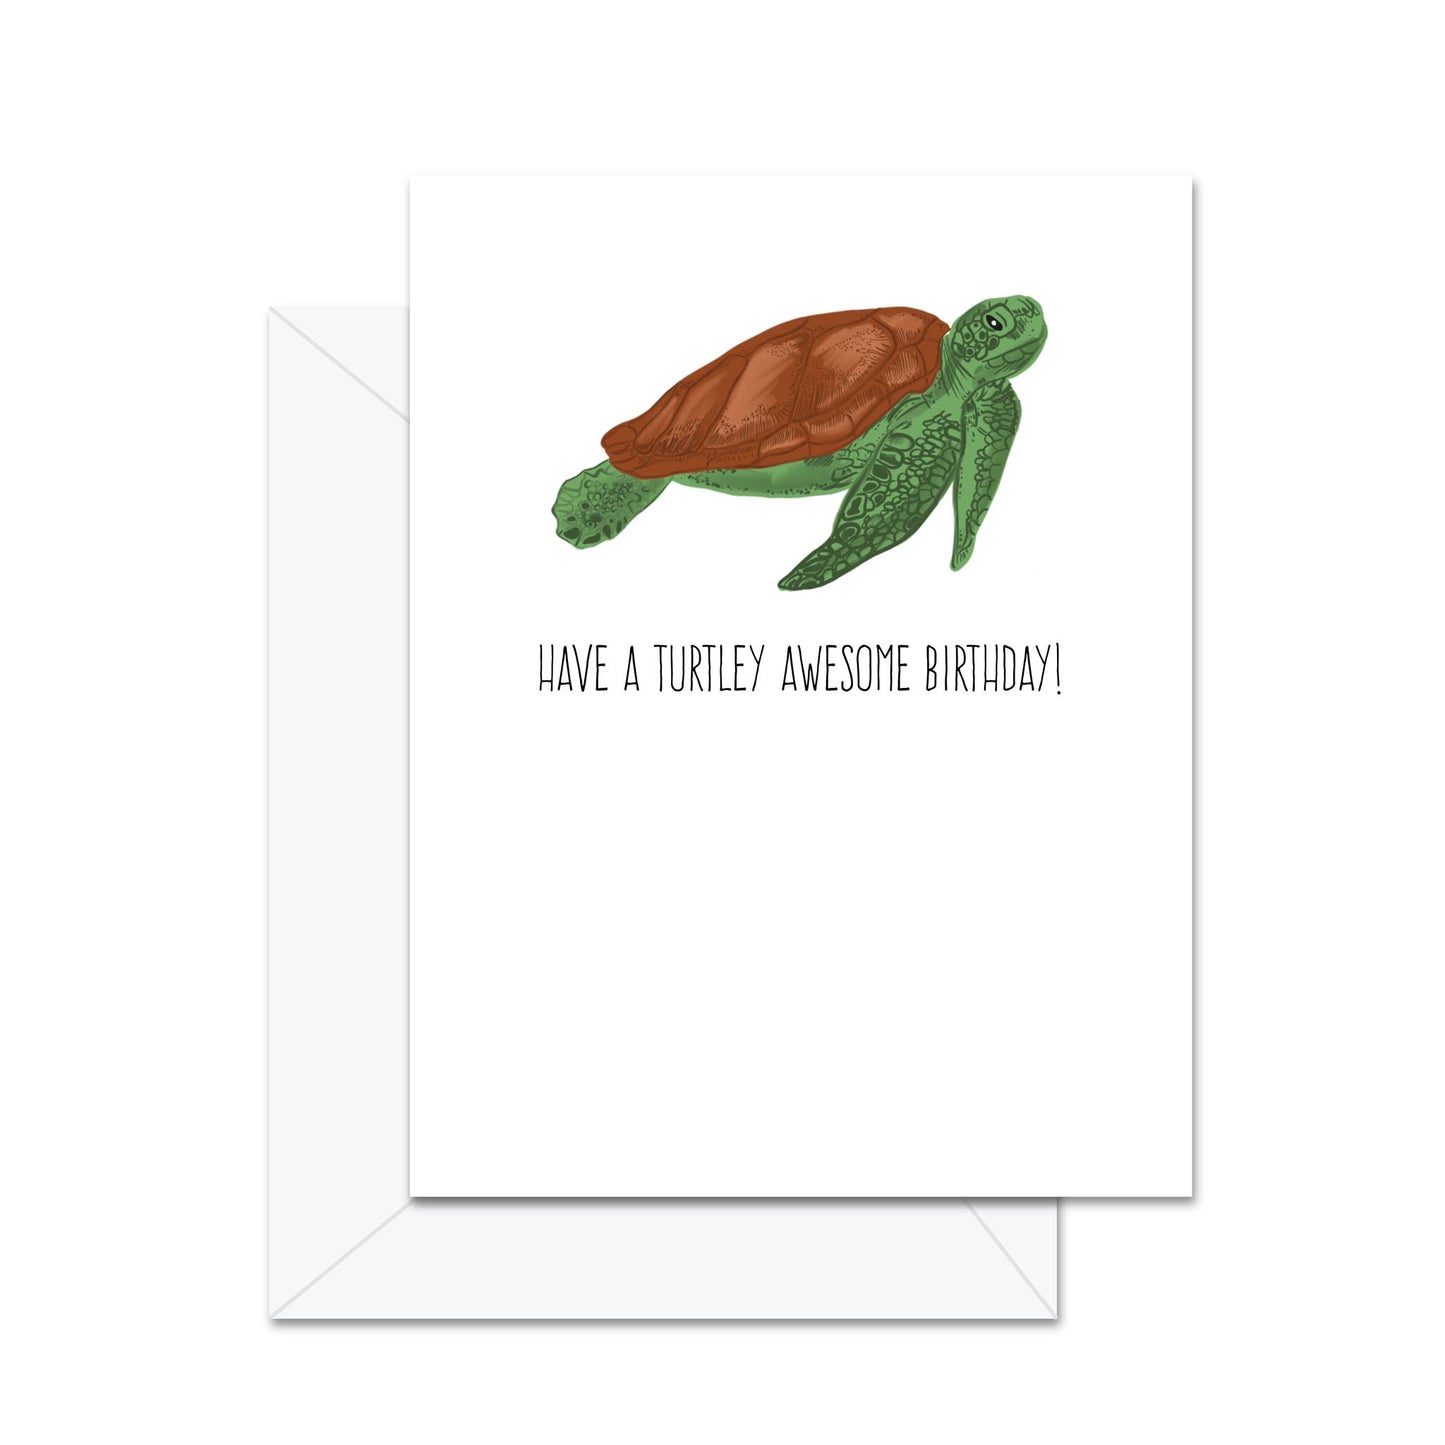 Have A Turtley Awesome Birthday! - Greeting Card